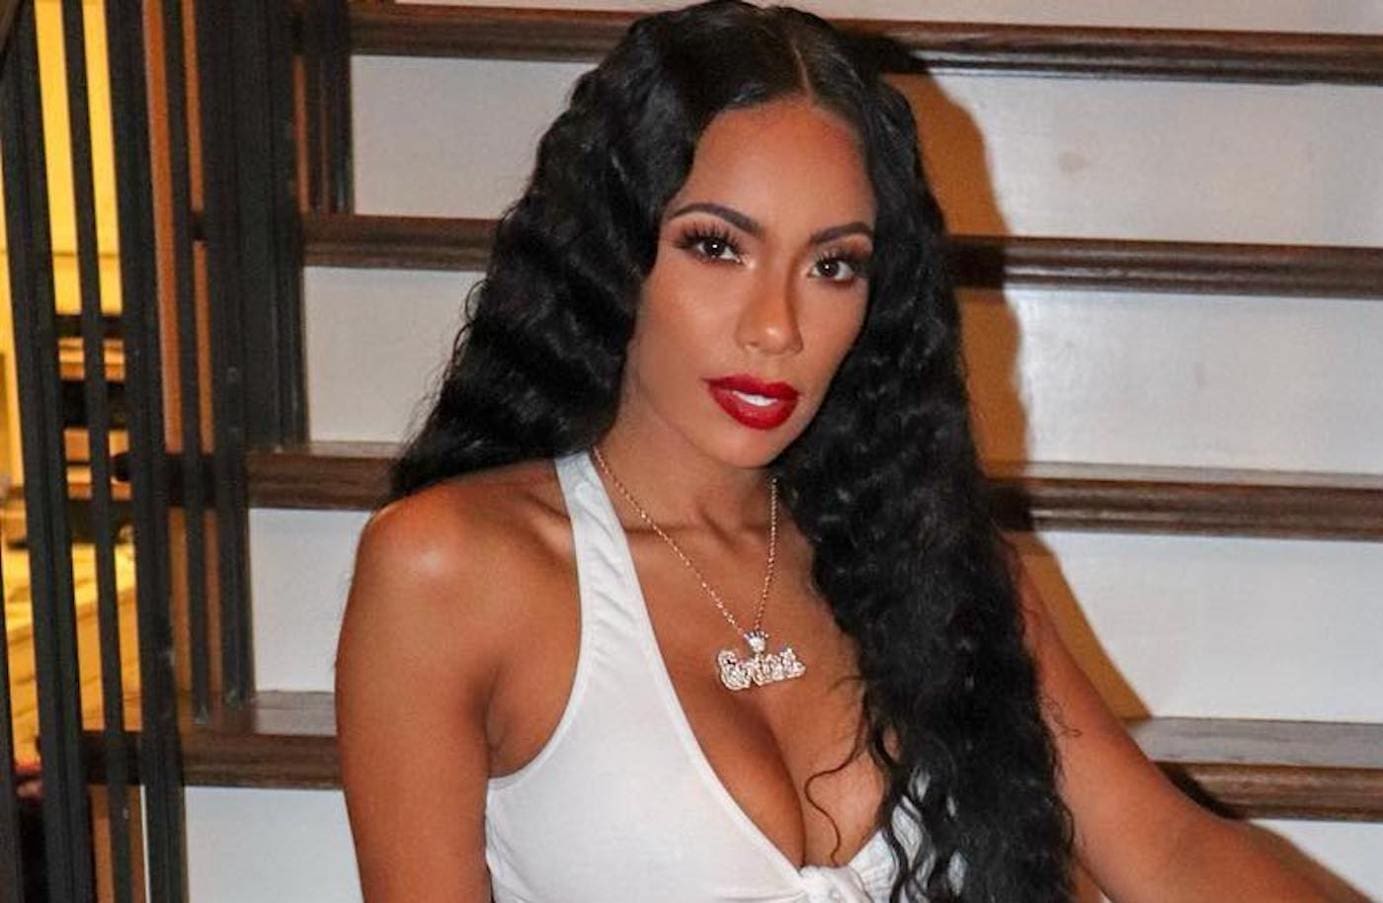 Erica Mena Shows Fans How Her Friday Night Was - See The Photo